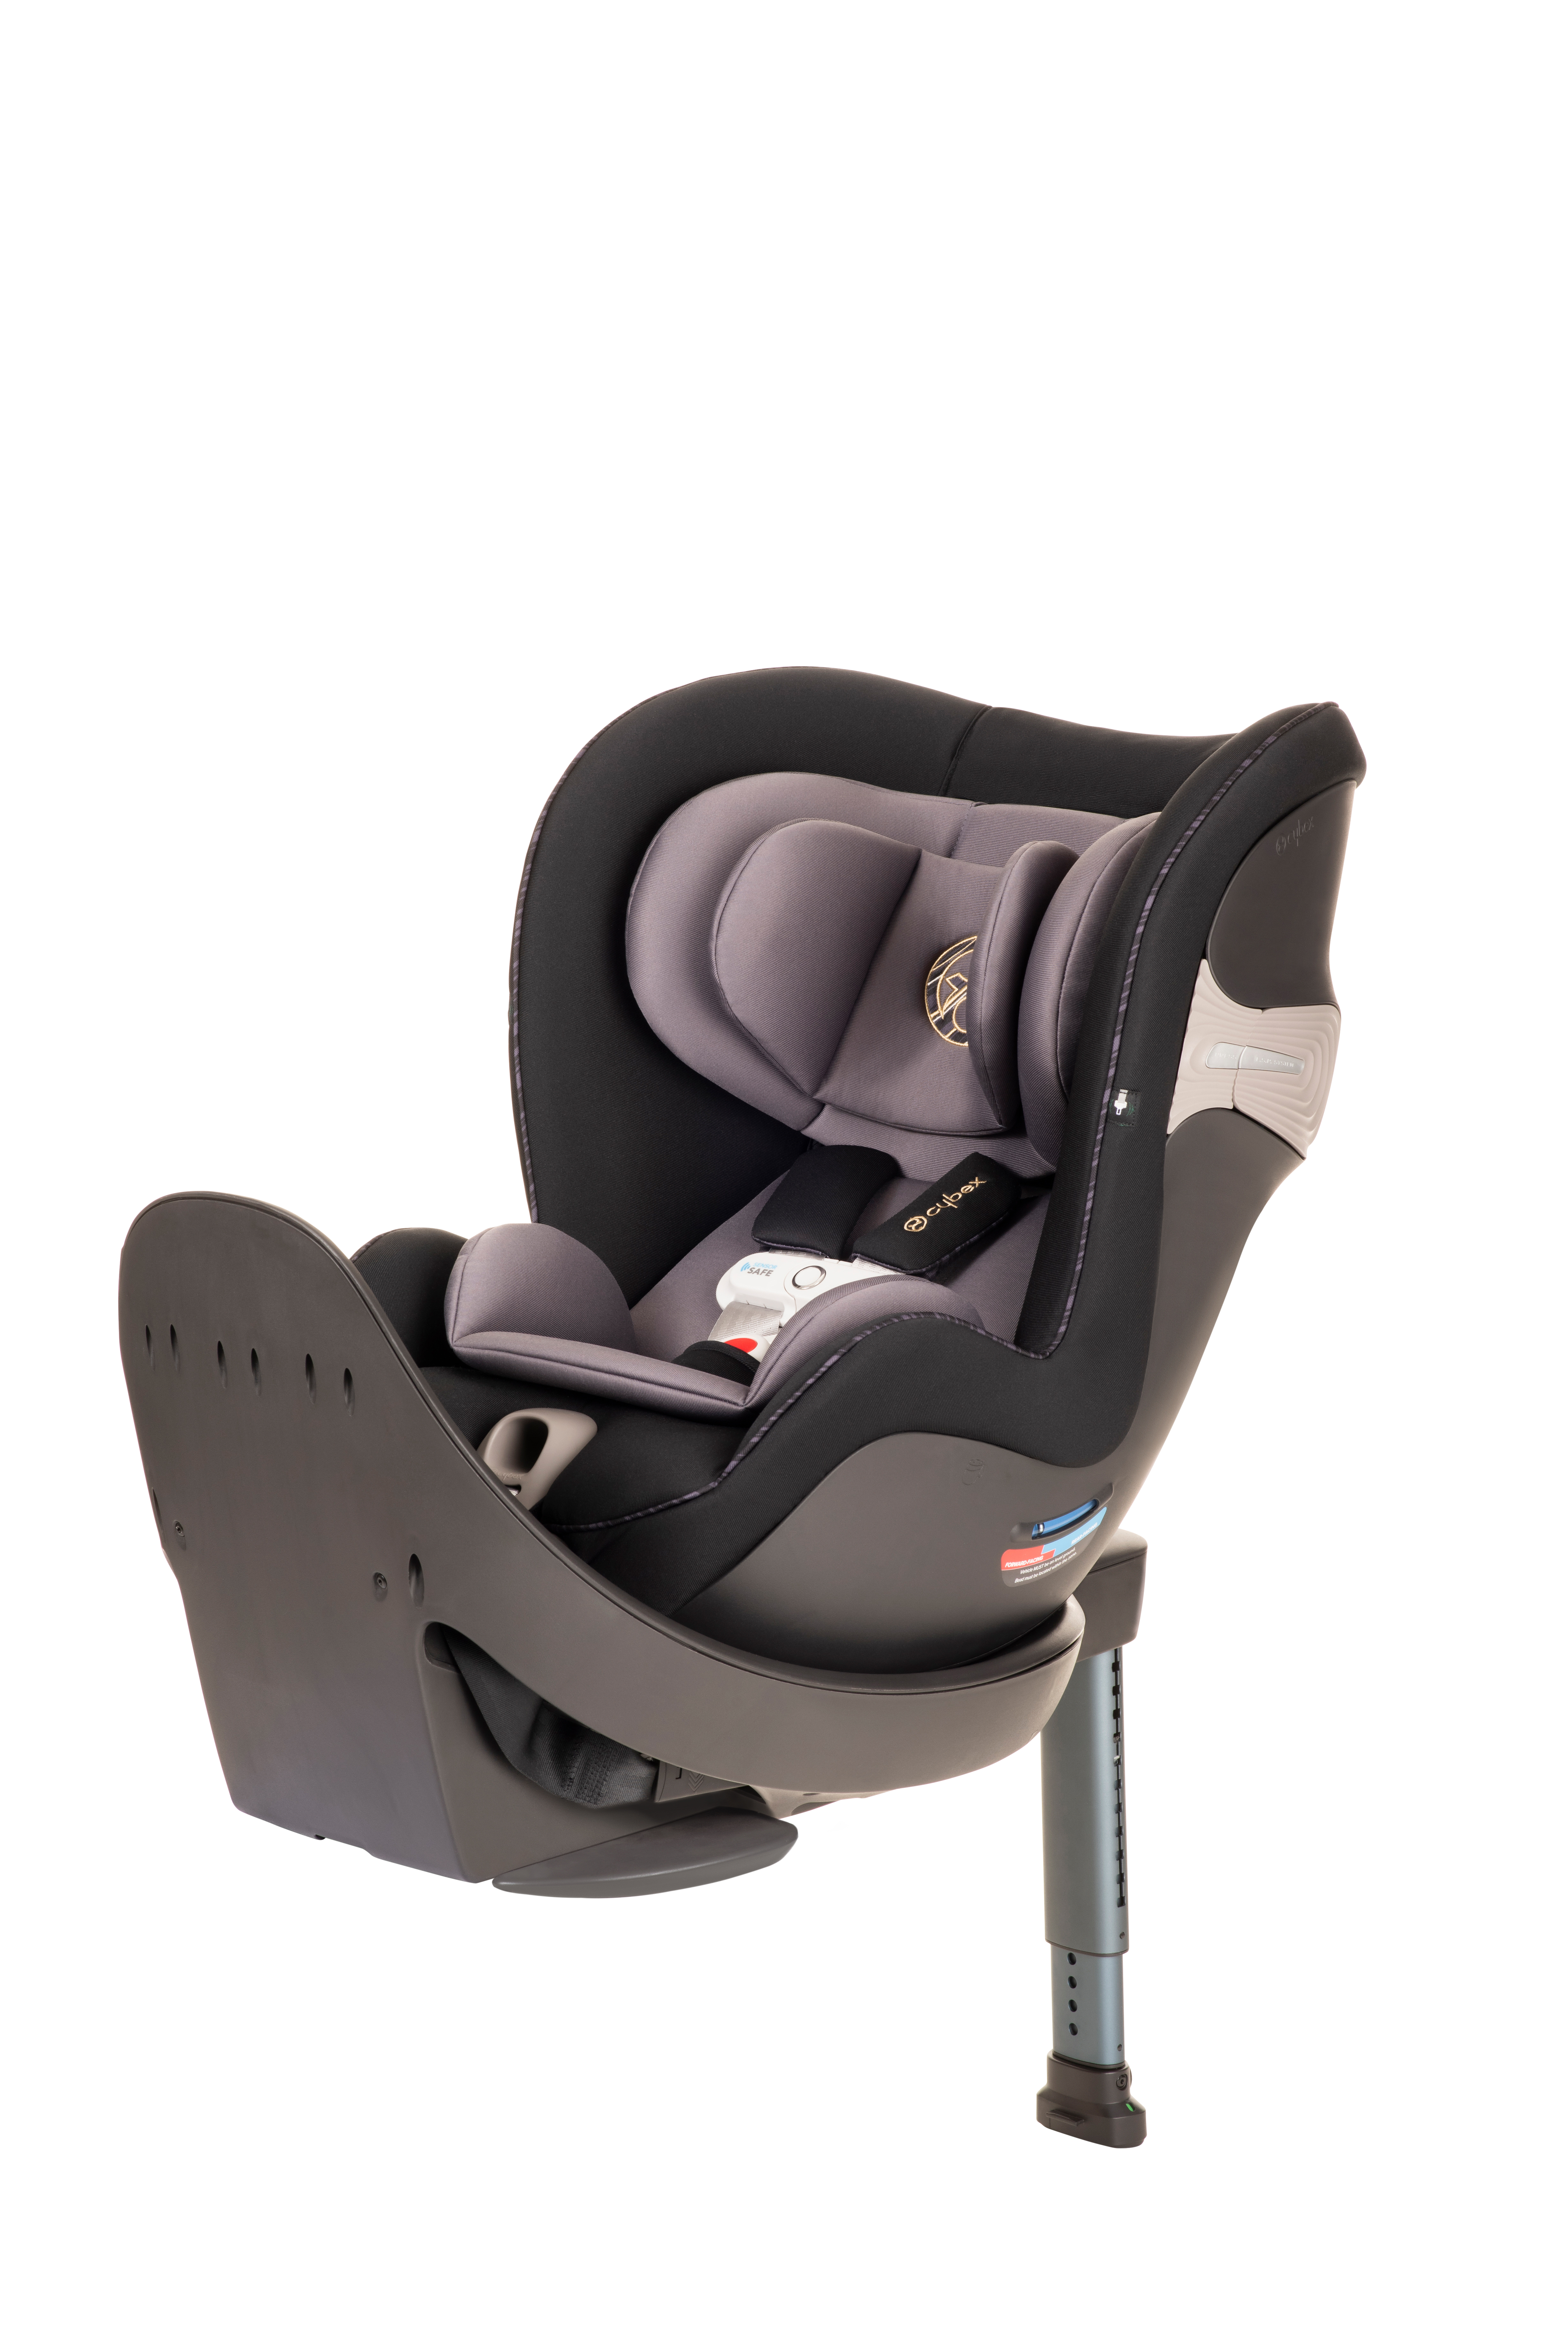 safest convertible car seat 2019 consumer reports